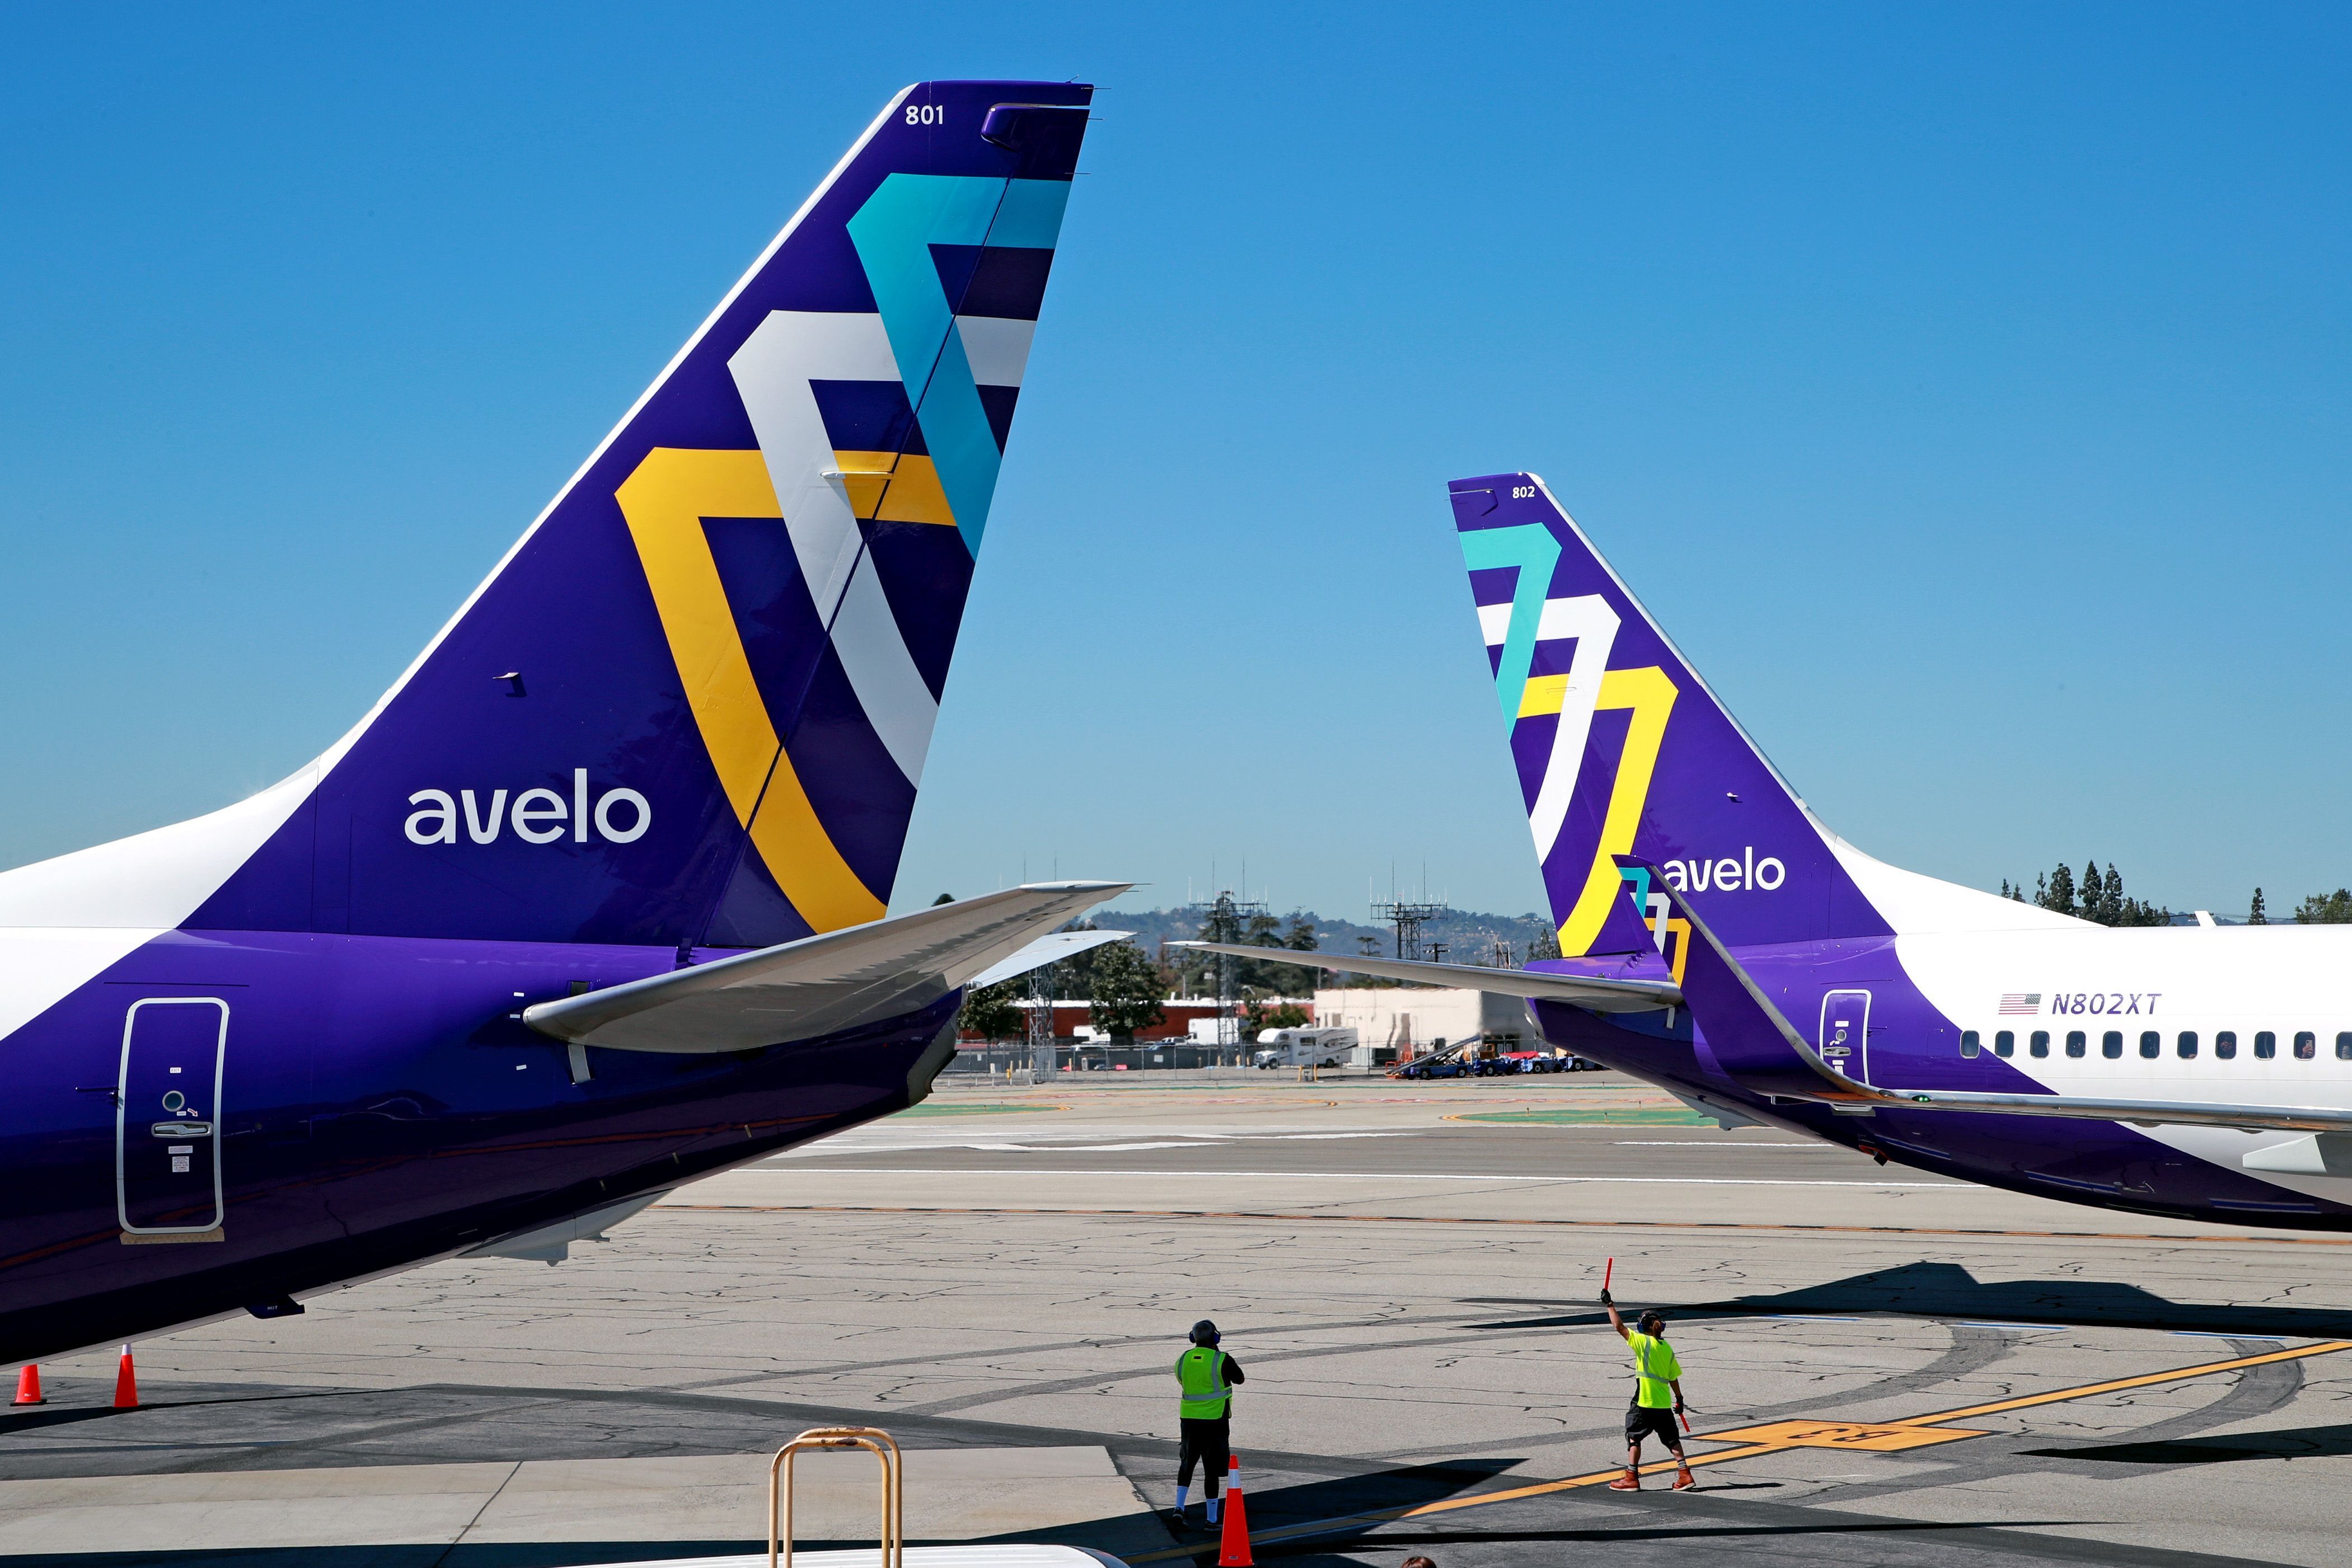 Two Avelo Airlines 737 aircraft